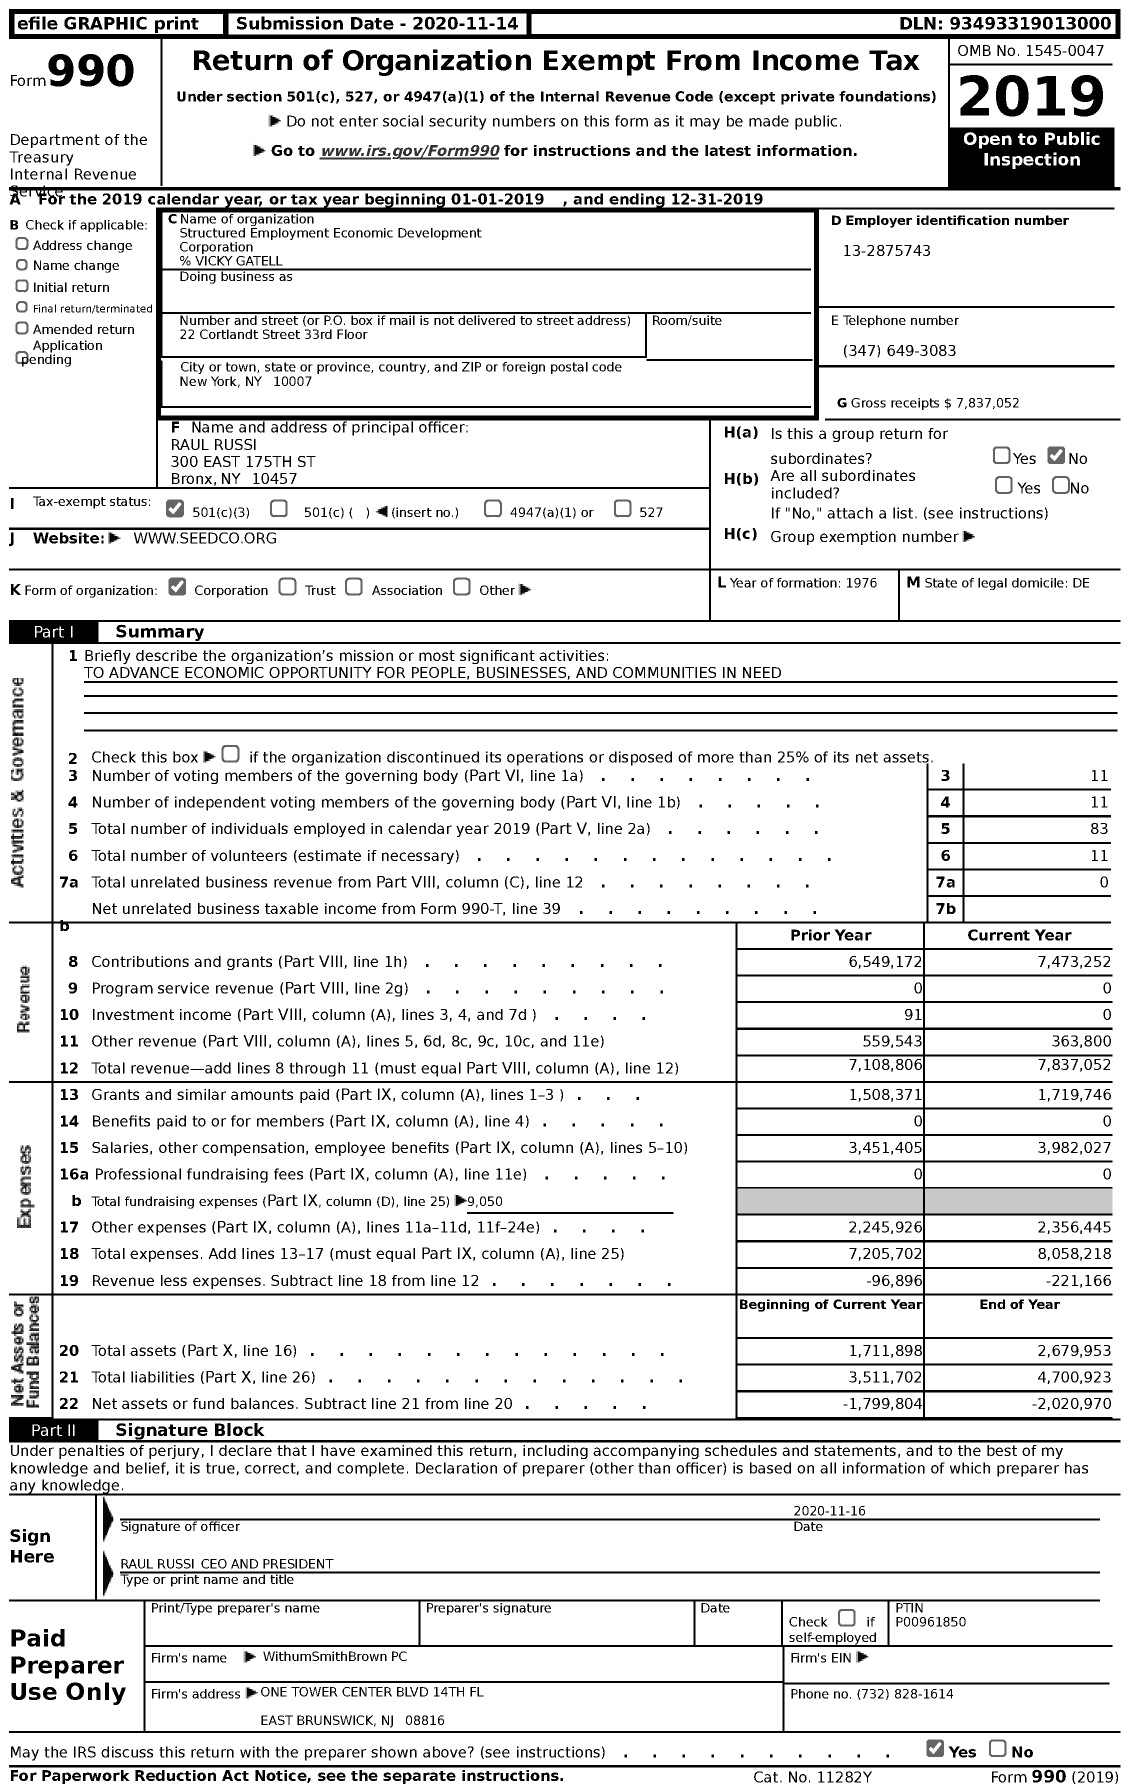 Image of first page of 2019 Form 990 for Structured Employment Economic Development Corporation (SEEDCO)